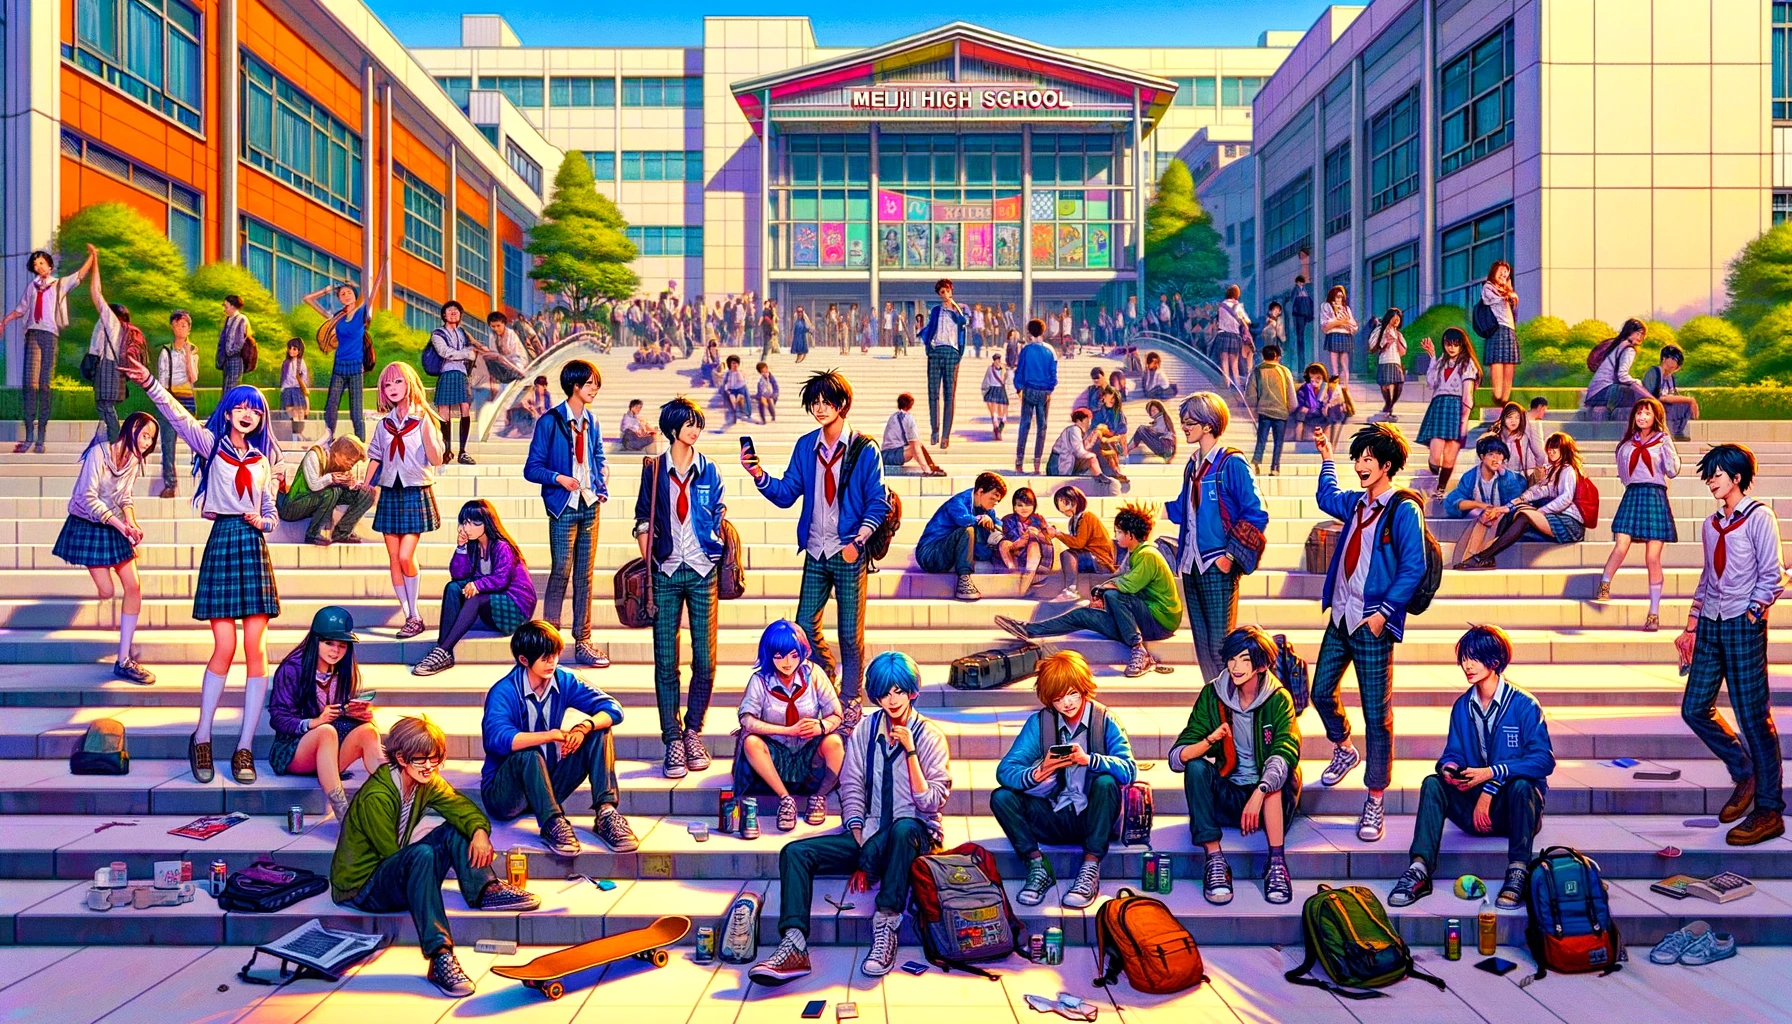 A lively high school campus scene depicting the vibrant student culture at Meiji High School in Japan, often described as spirited and carefree. The image features students in casual, fashionable outfits instead of traditional uniforms, hanging out in groups, laughing, and taking selfies. Some students are listening to music, others are skateboarding or playing casual sports on the school grounds. The setting is informal with students lounging on steps and under trees, embodying a relaxed and youthful vibe. The architecture of the school includes modern, colorful elements, enhancing the playful atmosphere.